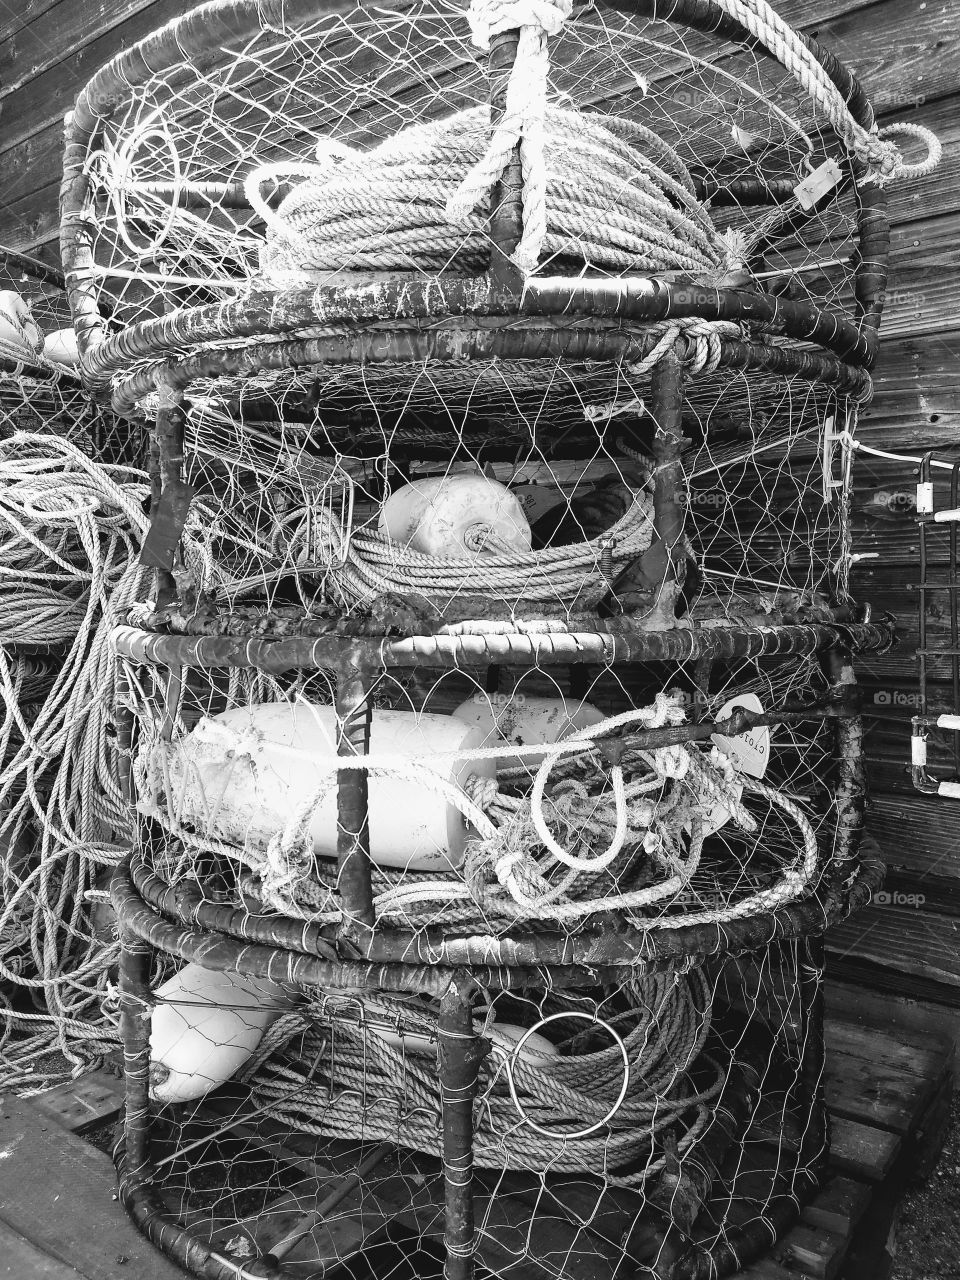 Stacked crab pots in Monterey Bay.